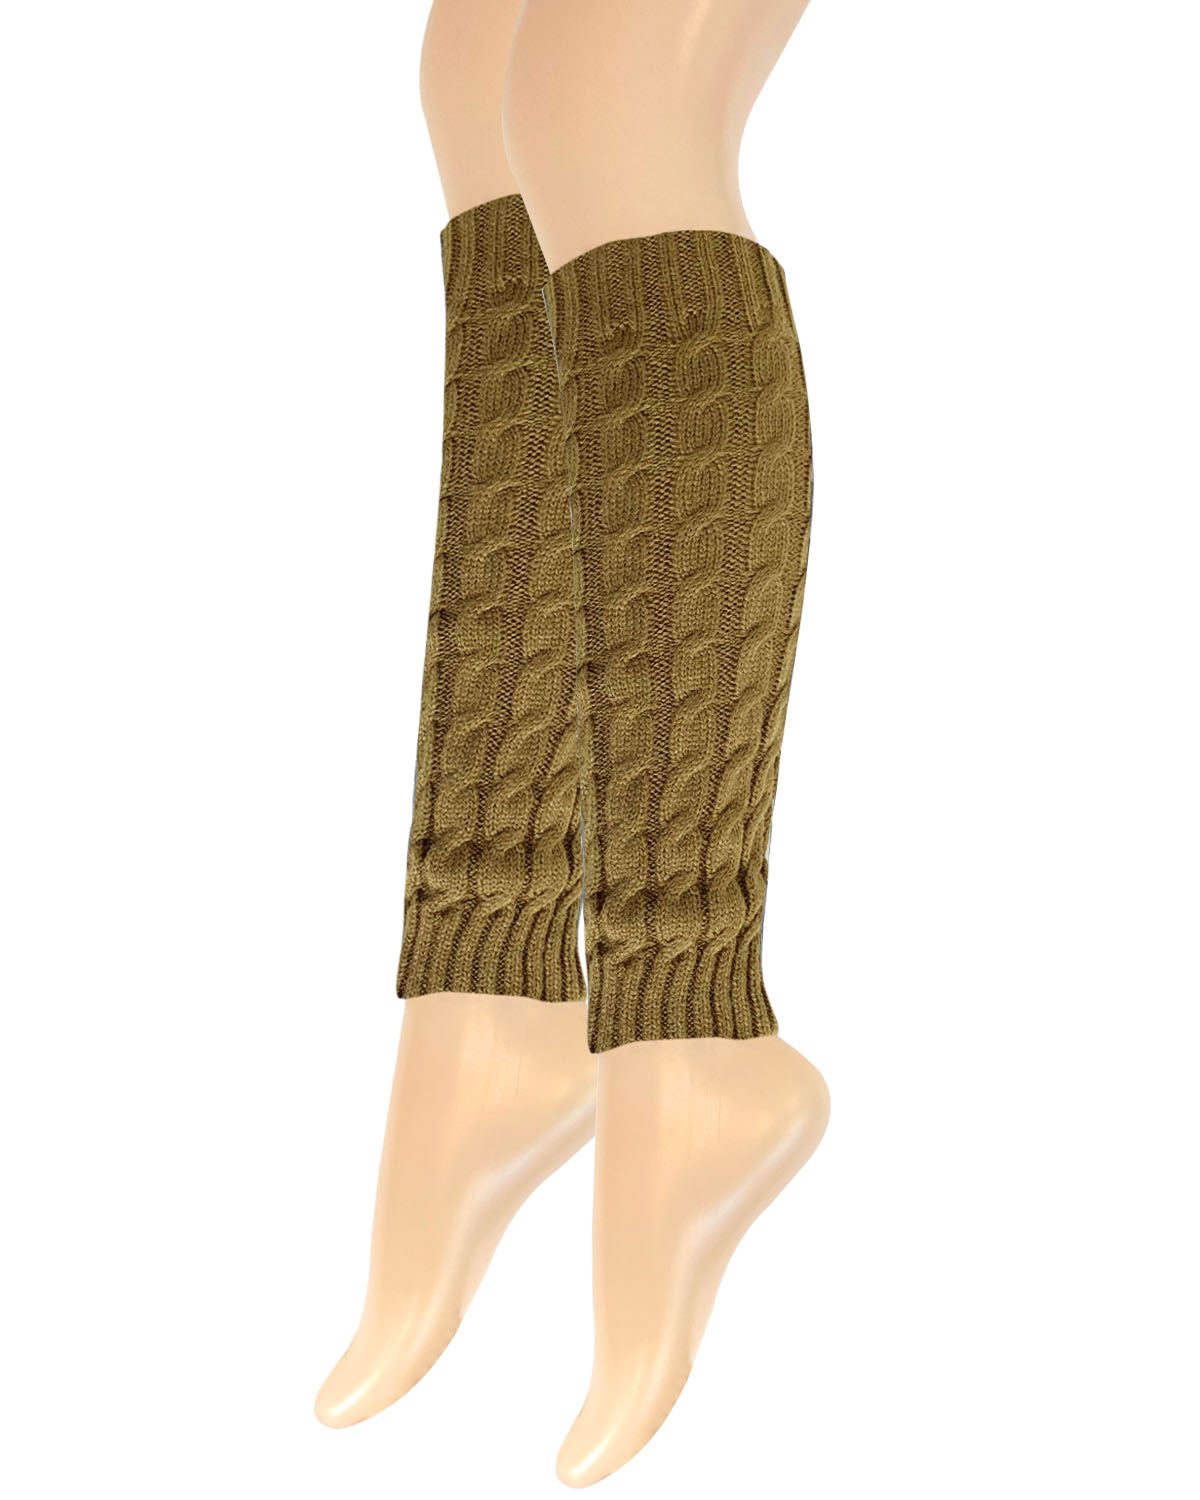 Cream Cable Knitted Leg Warmers, Accessories